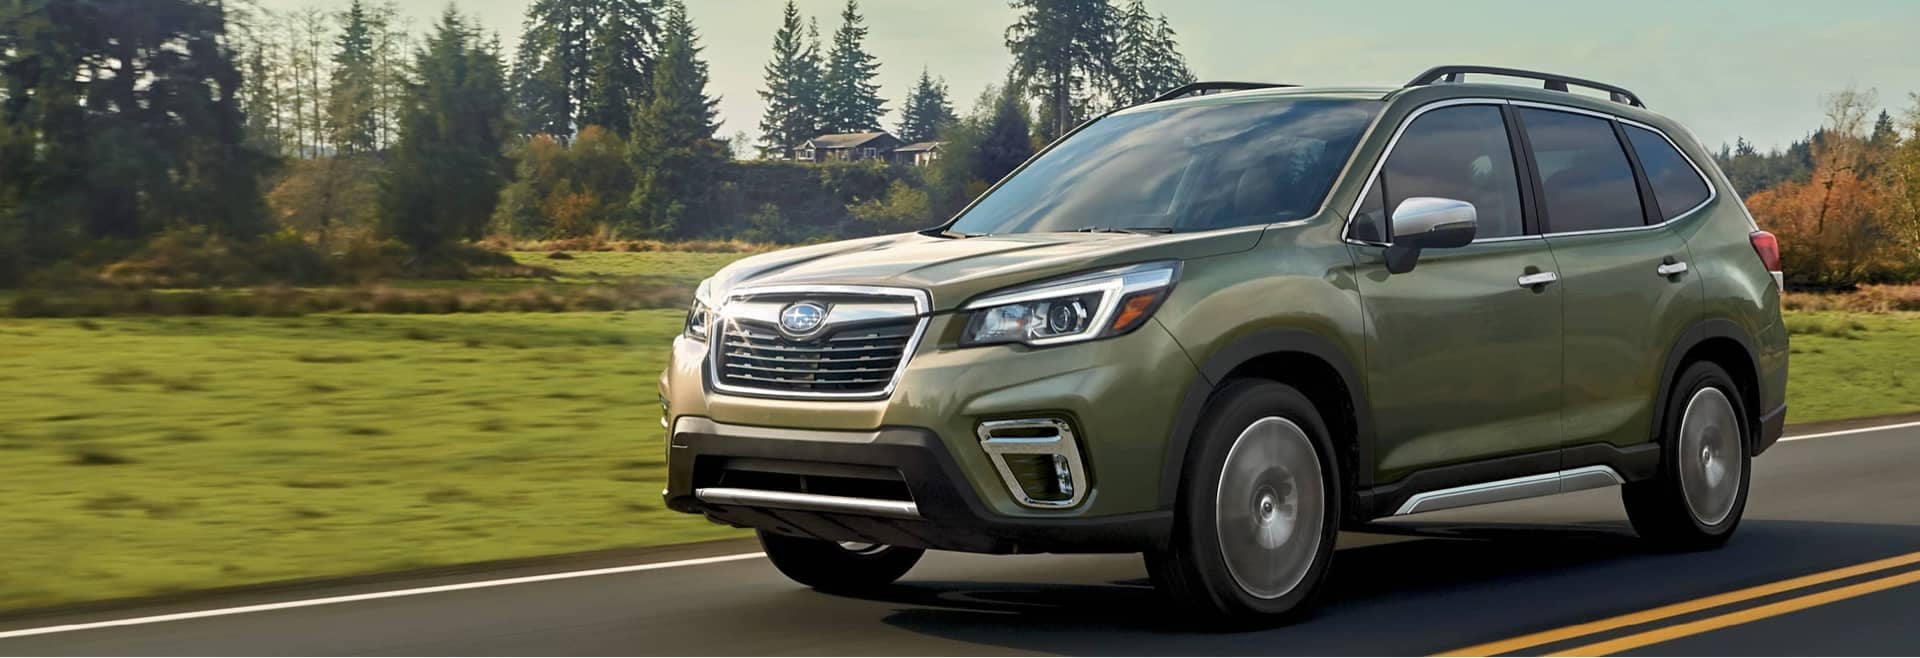 Forester Exterior Features